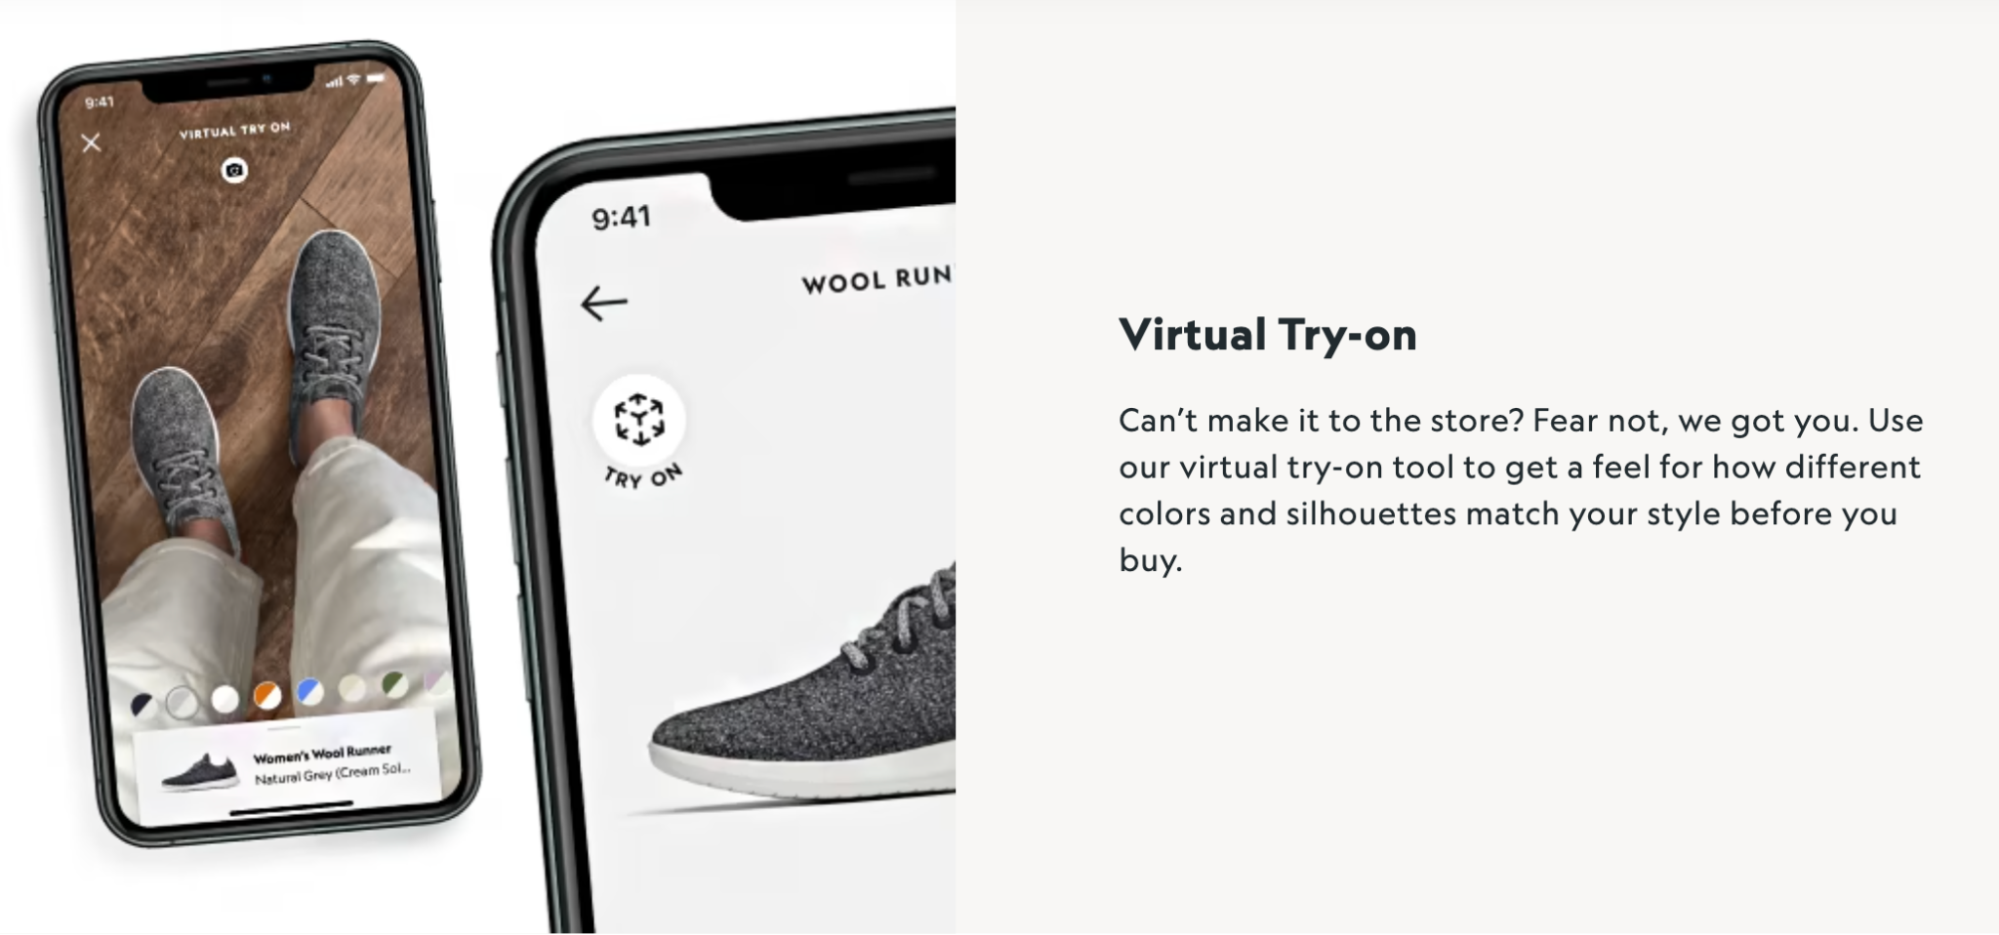 Information about Allbirds’ virtual try-on with smartphone screens showing its shoes.